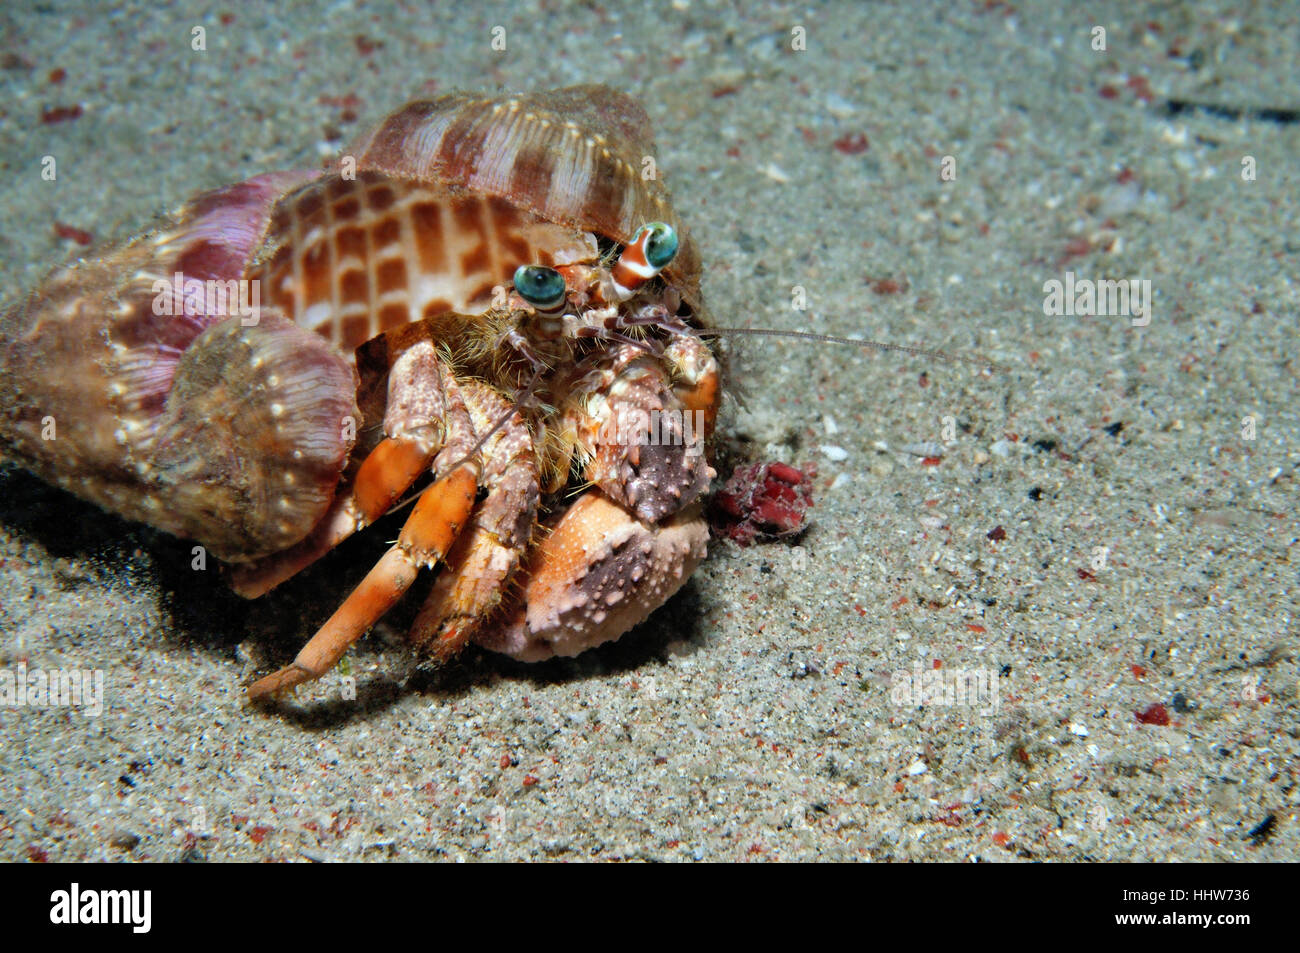 Anemone hermit crab laden with anemones for camouflage and defense, Puerto Galera, Philippines Stock Photo